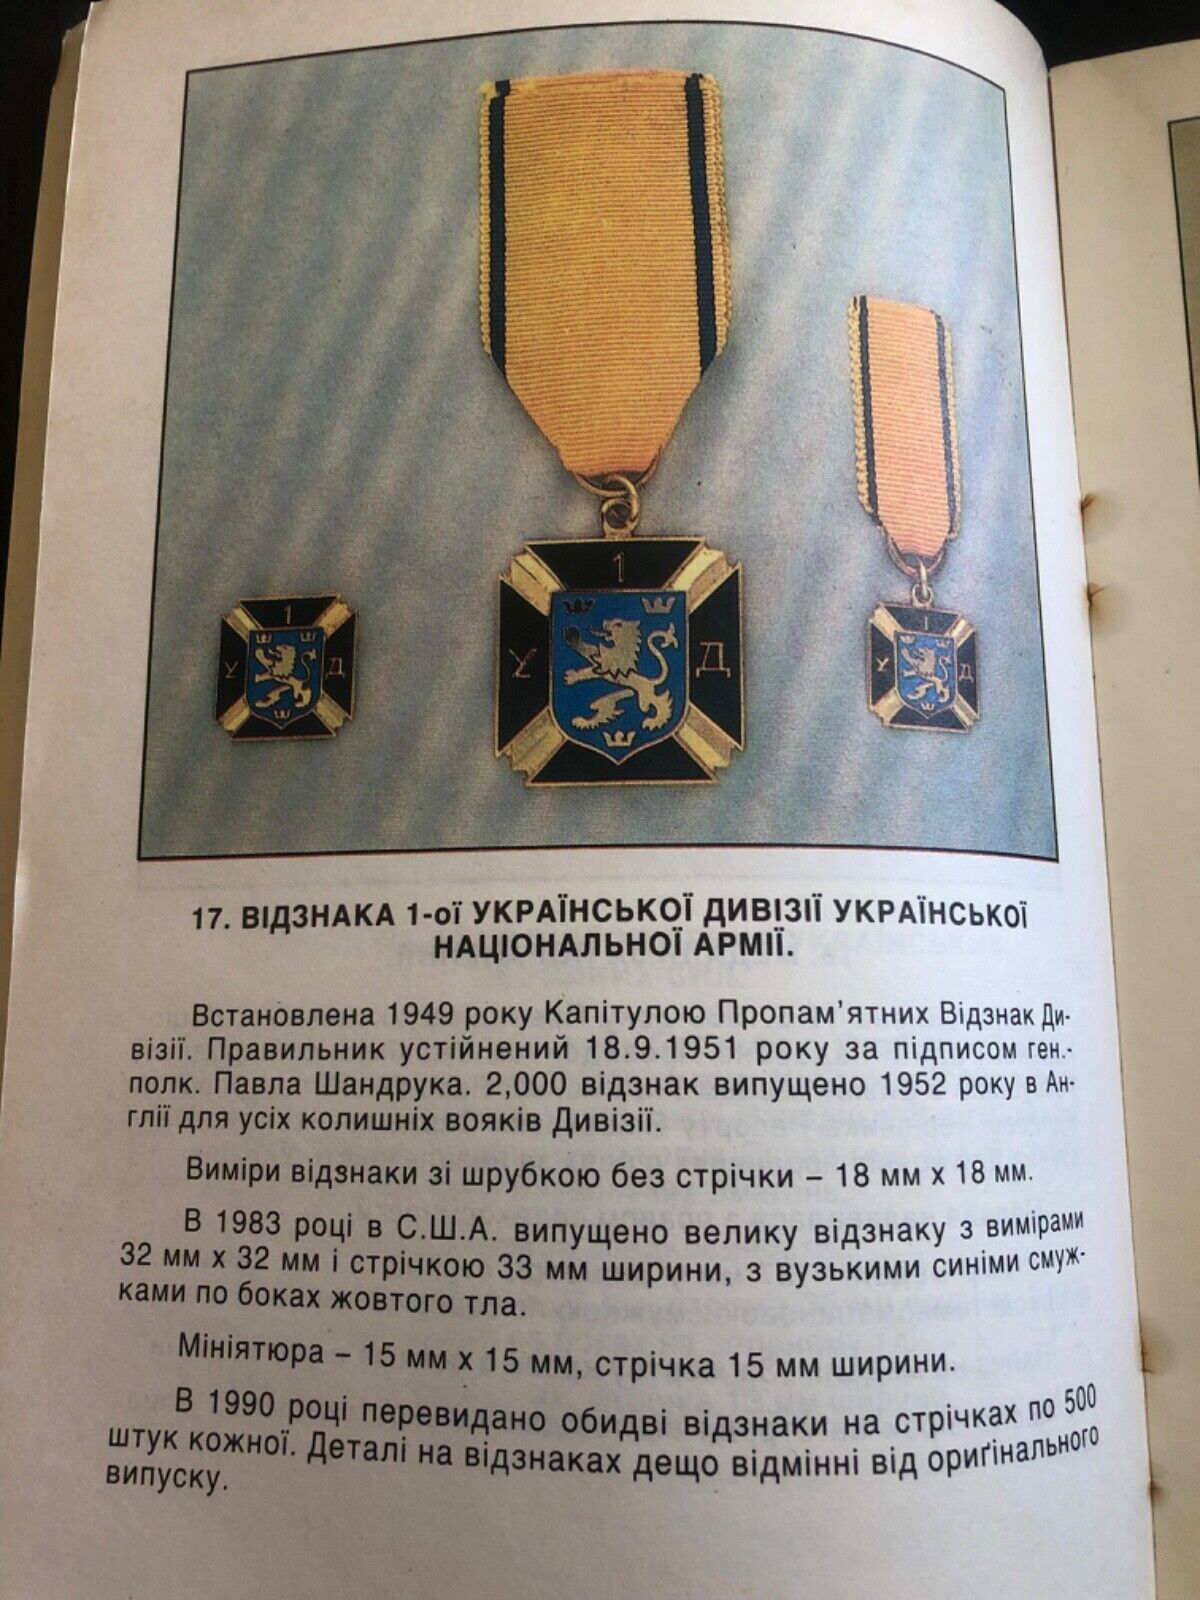 First Ukrainian Division of the Ukrainian National Army 1st Galician Division